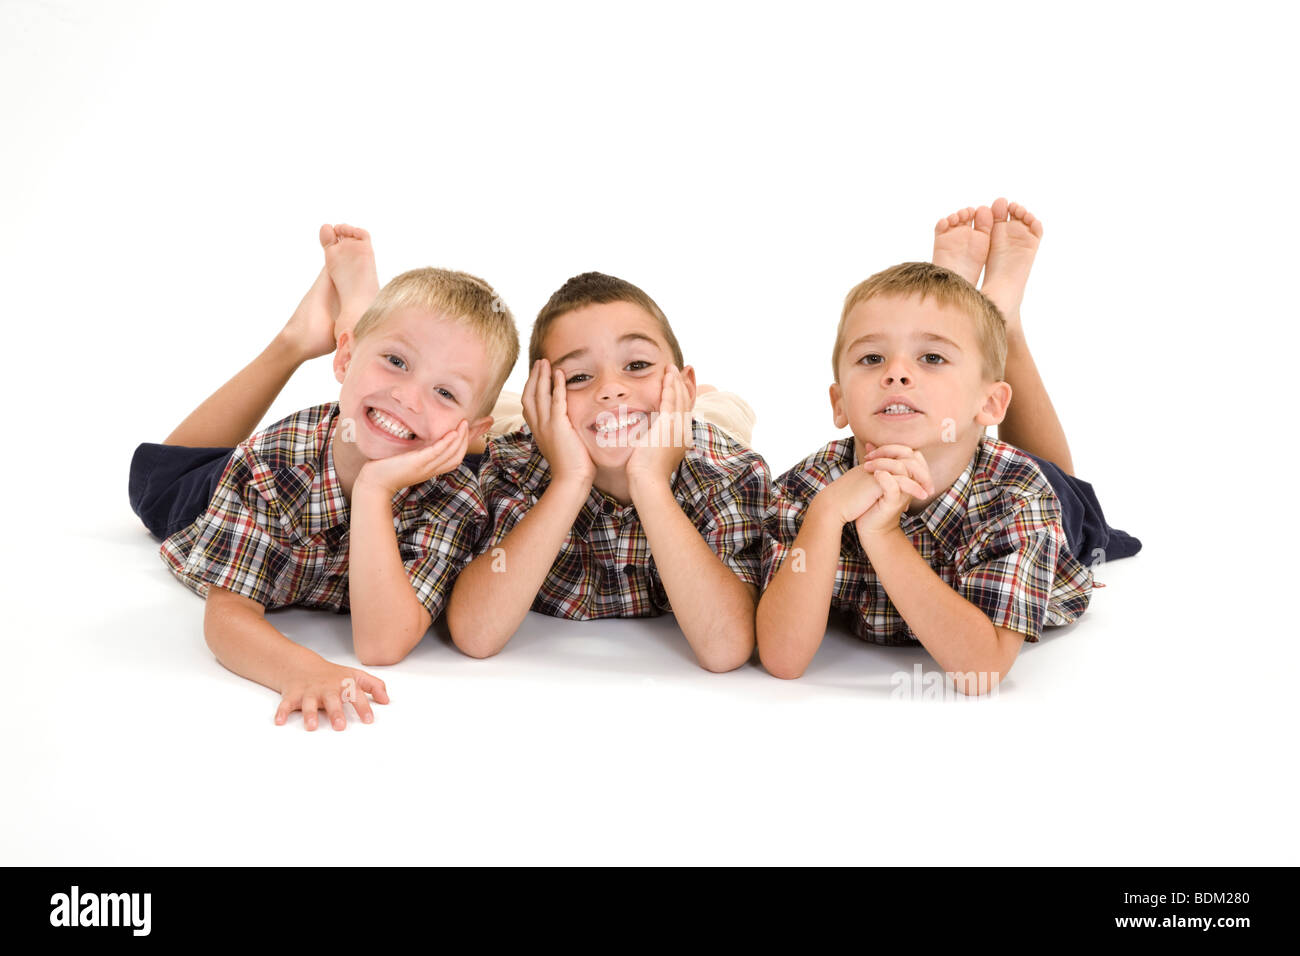 Three Caucasian boys laying on a white background and smiling. Stock Photo